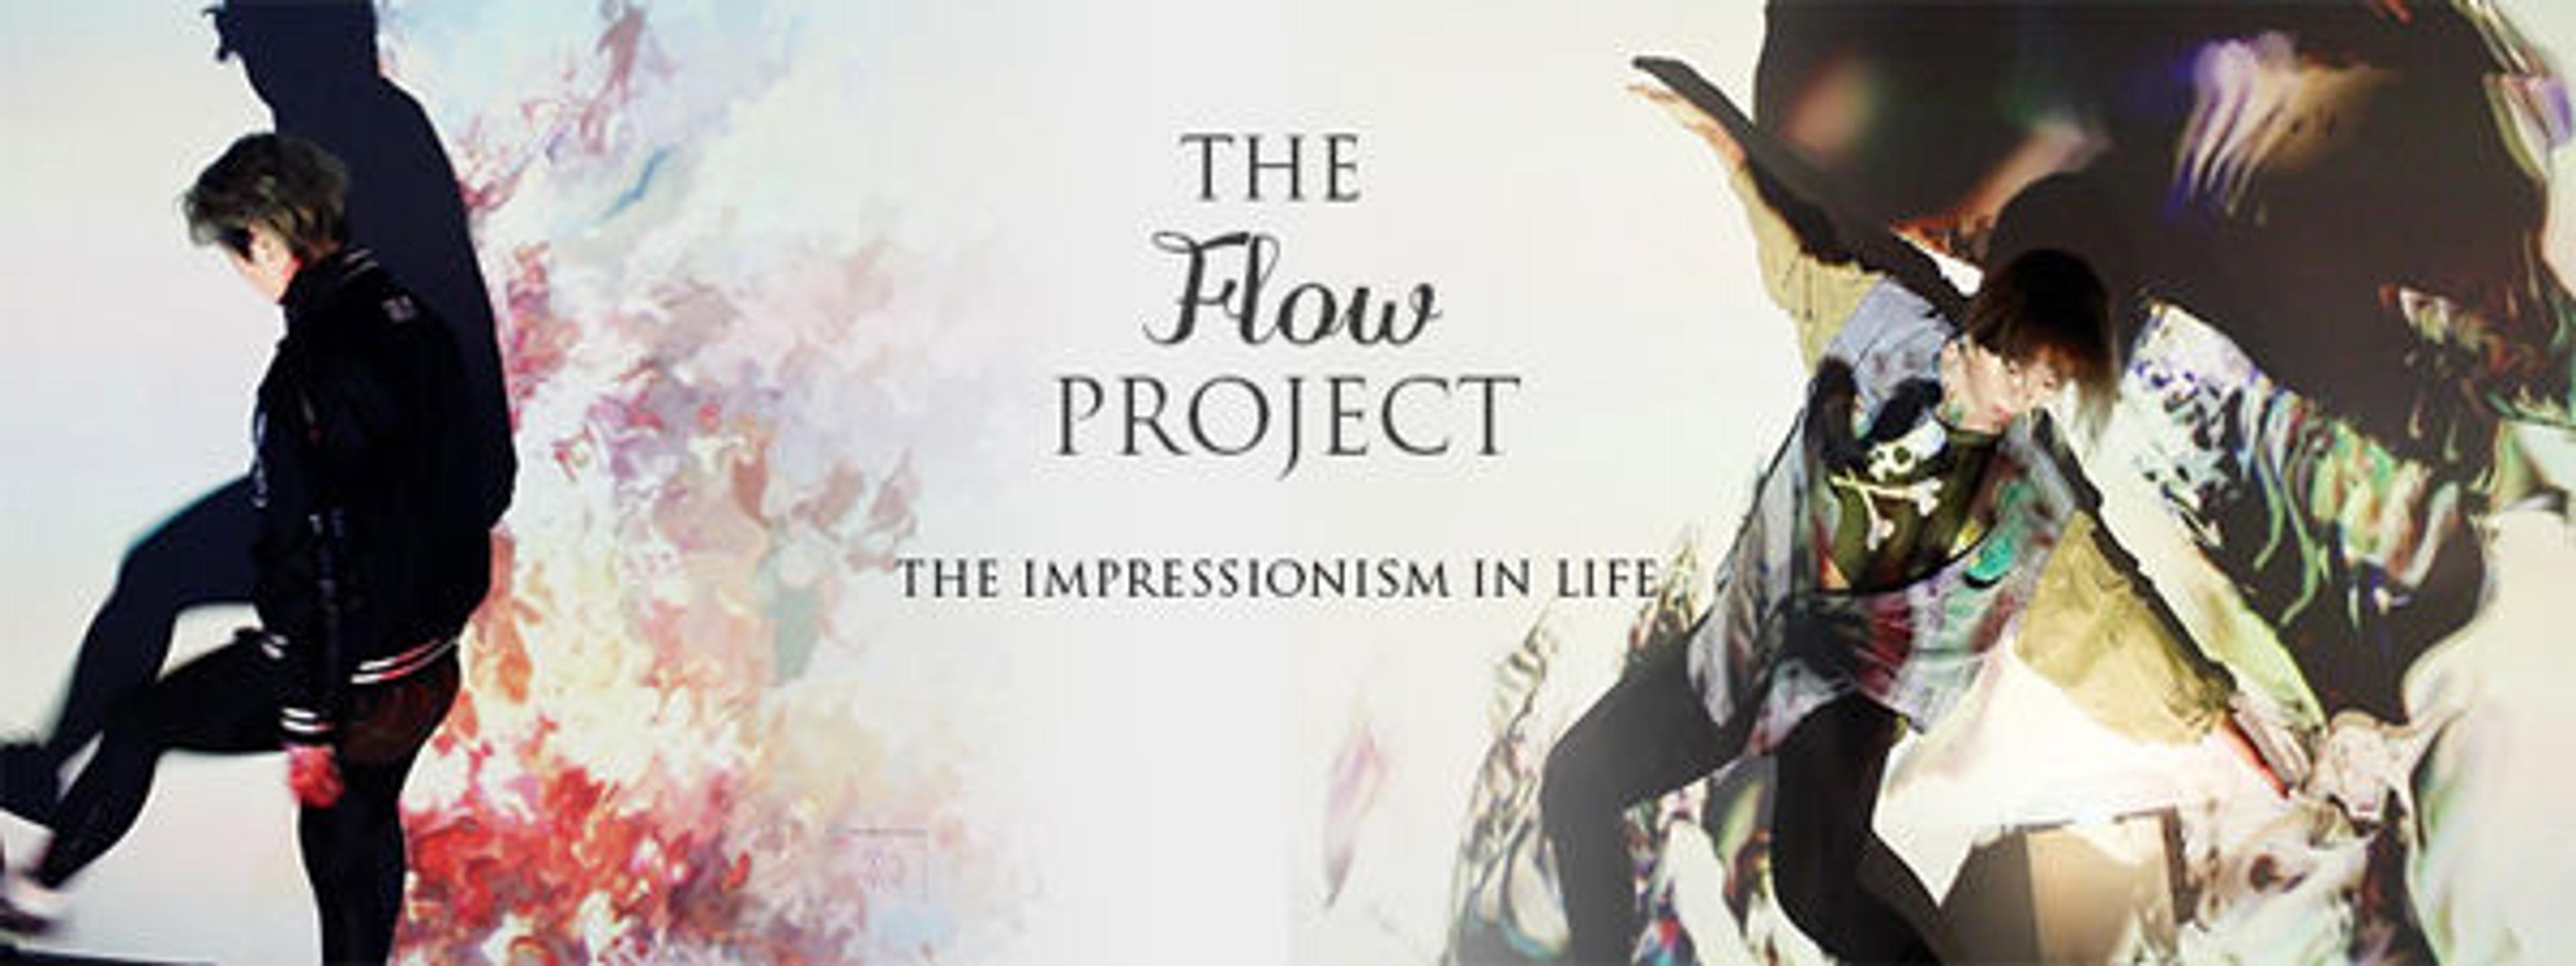 The Flow Project's logo. Image courtesy of the author